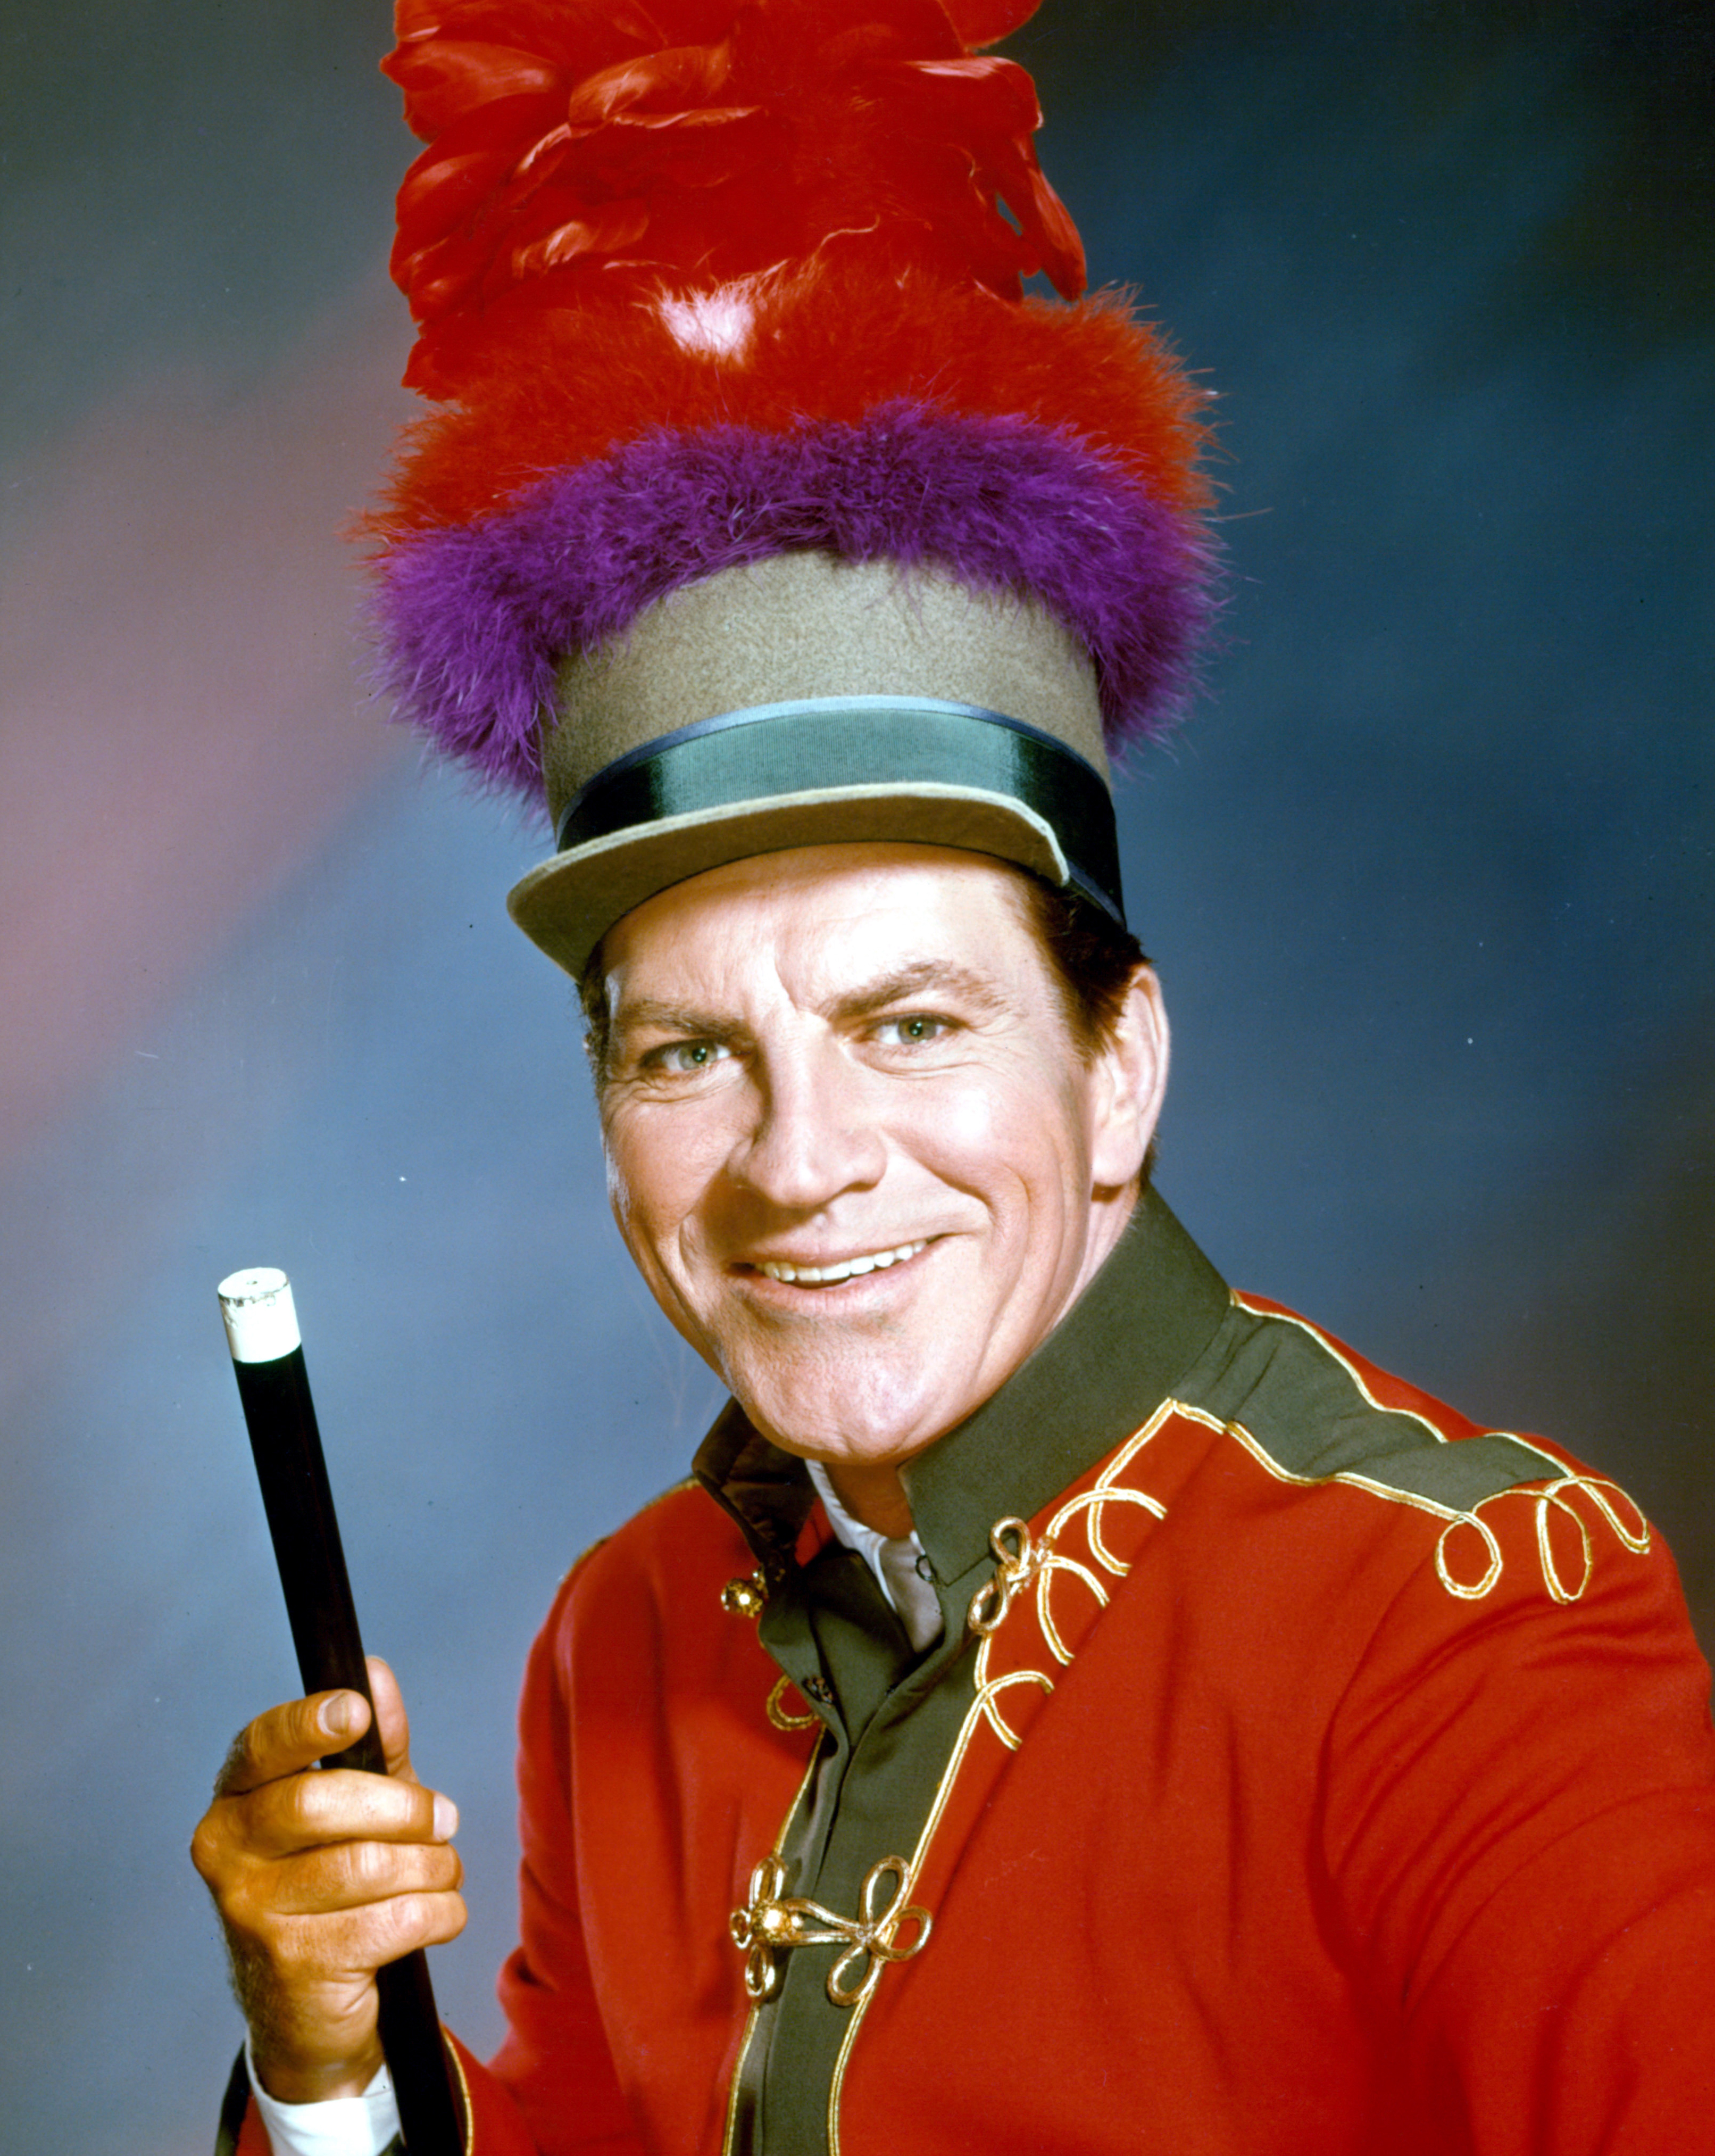 Robert Preston in a scene from the film 'The Music Man', 1962.